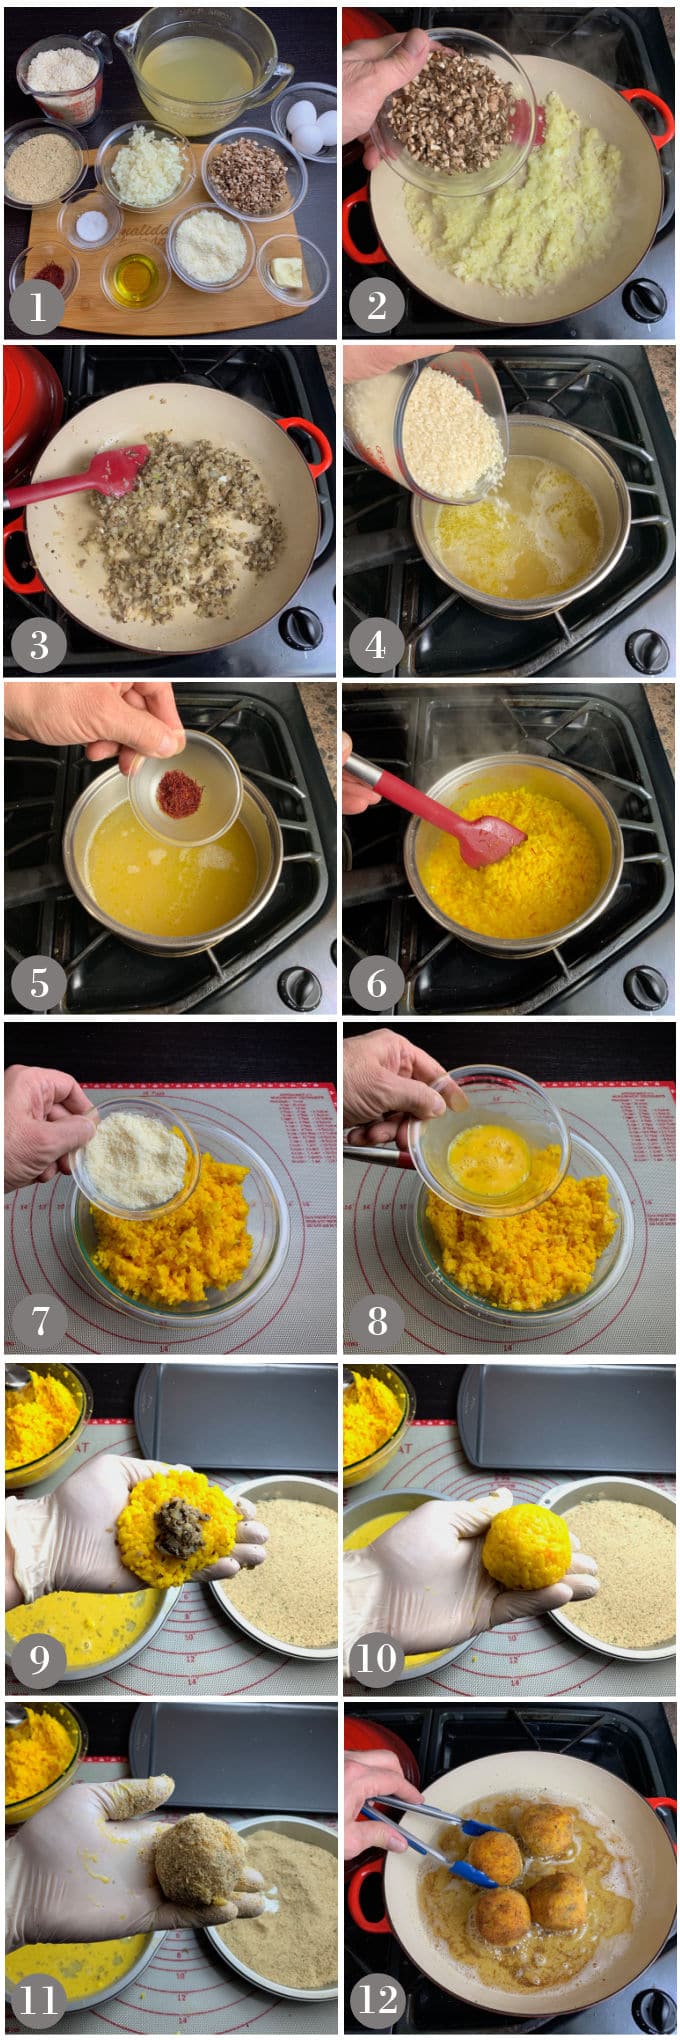 A collage of photos showing the steps to make Sicilian arancini on a stove.